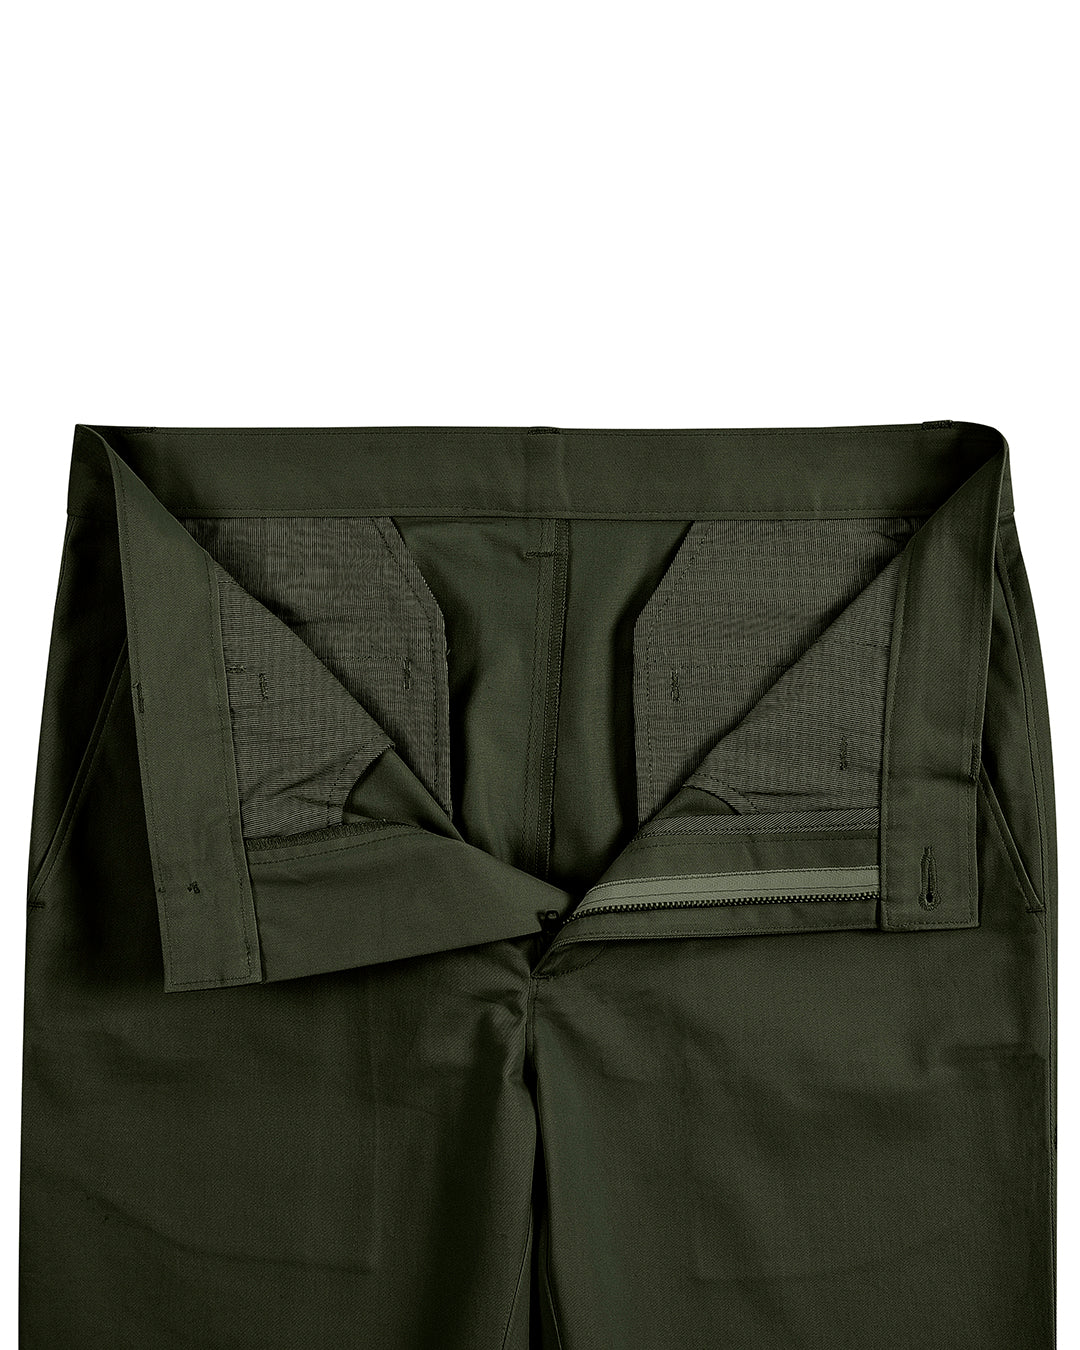 Front open view of custom Genoa Chino pants for men by Luxire in olive green